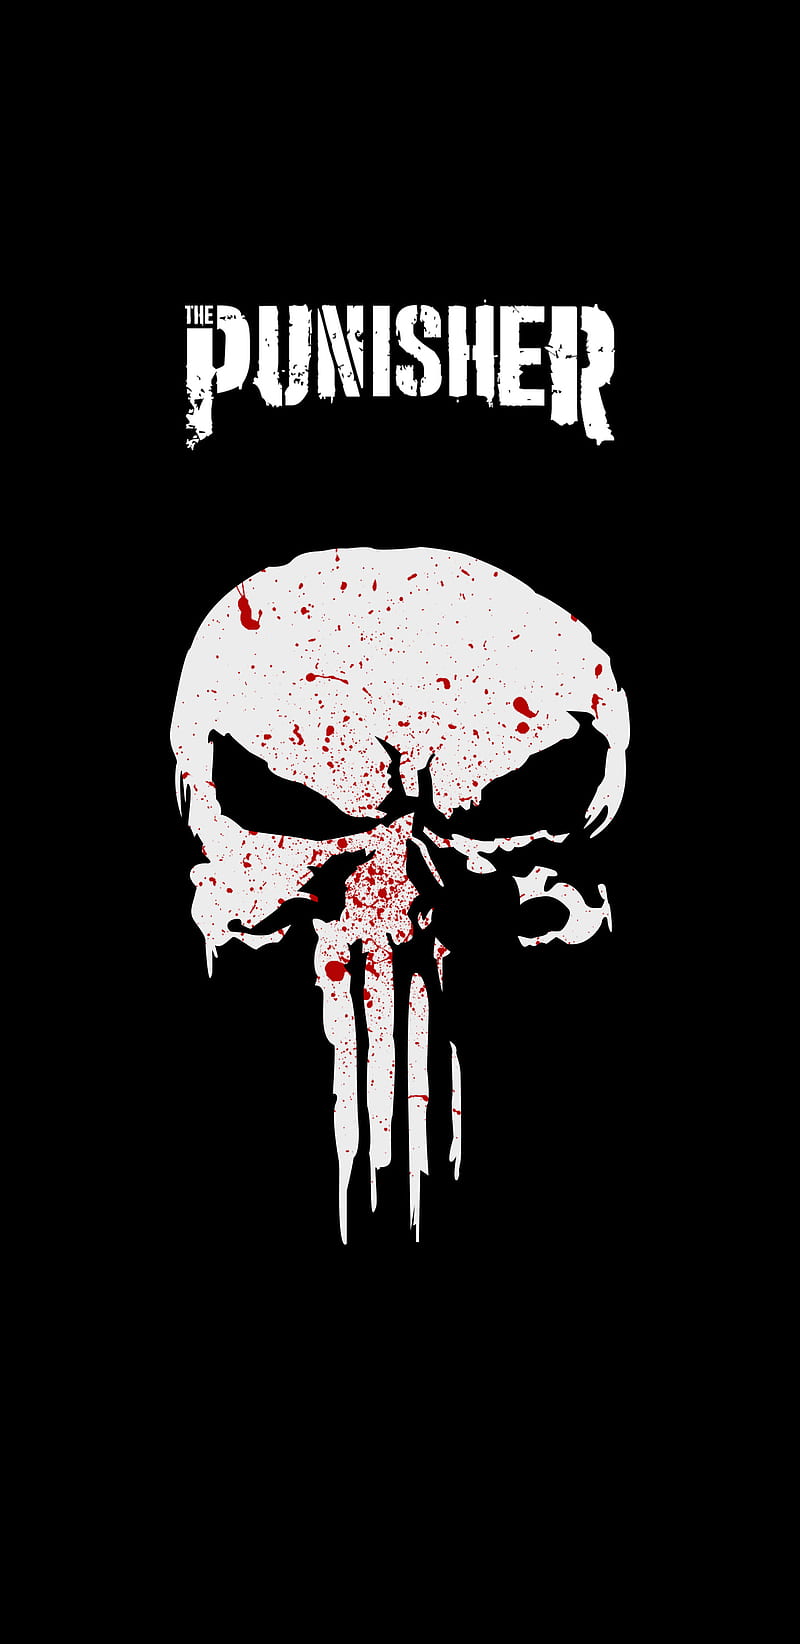 The Punisher AMOLED, the punisher, o justiceiro, justiceiro, super amoled, serie, skull, caveira, HD phone wallpaper